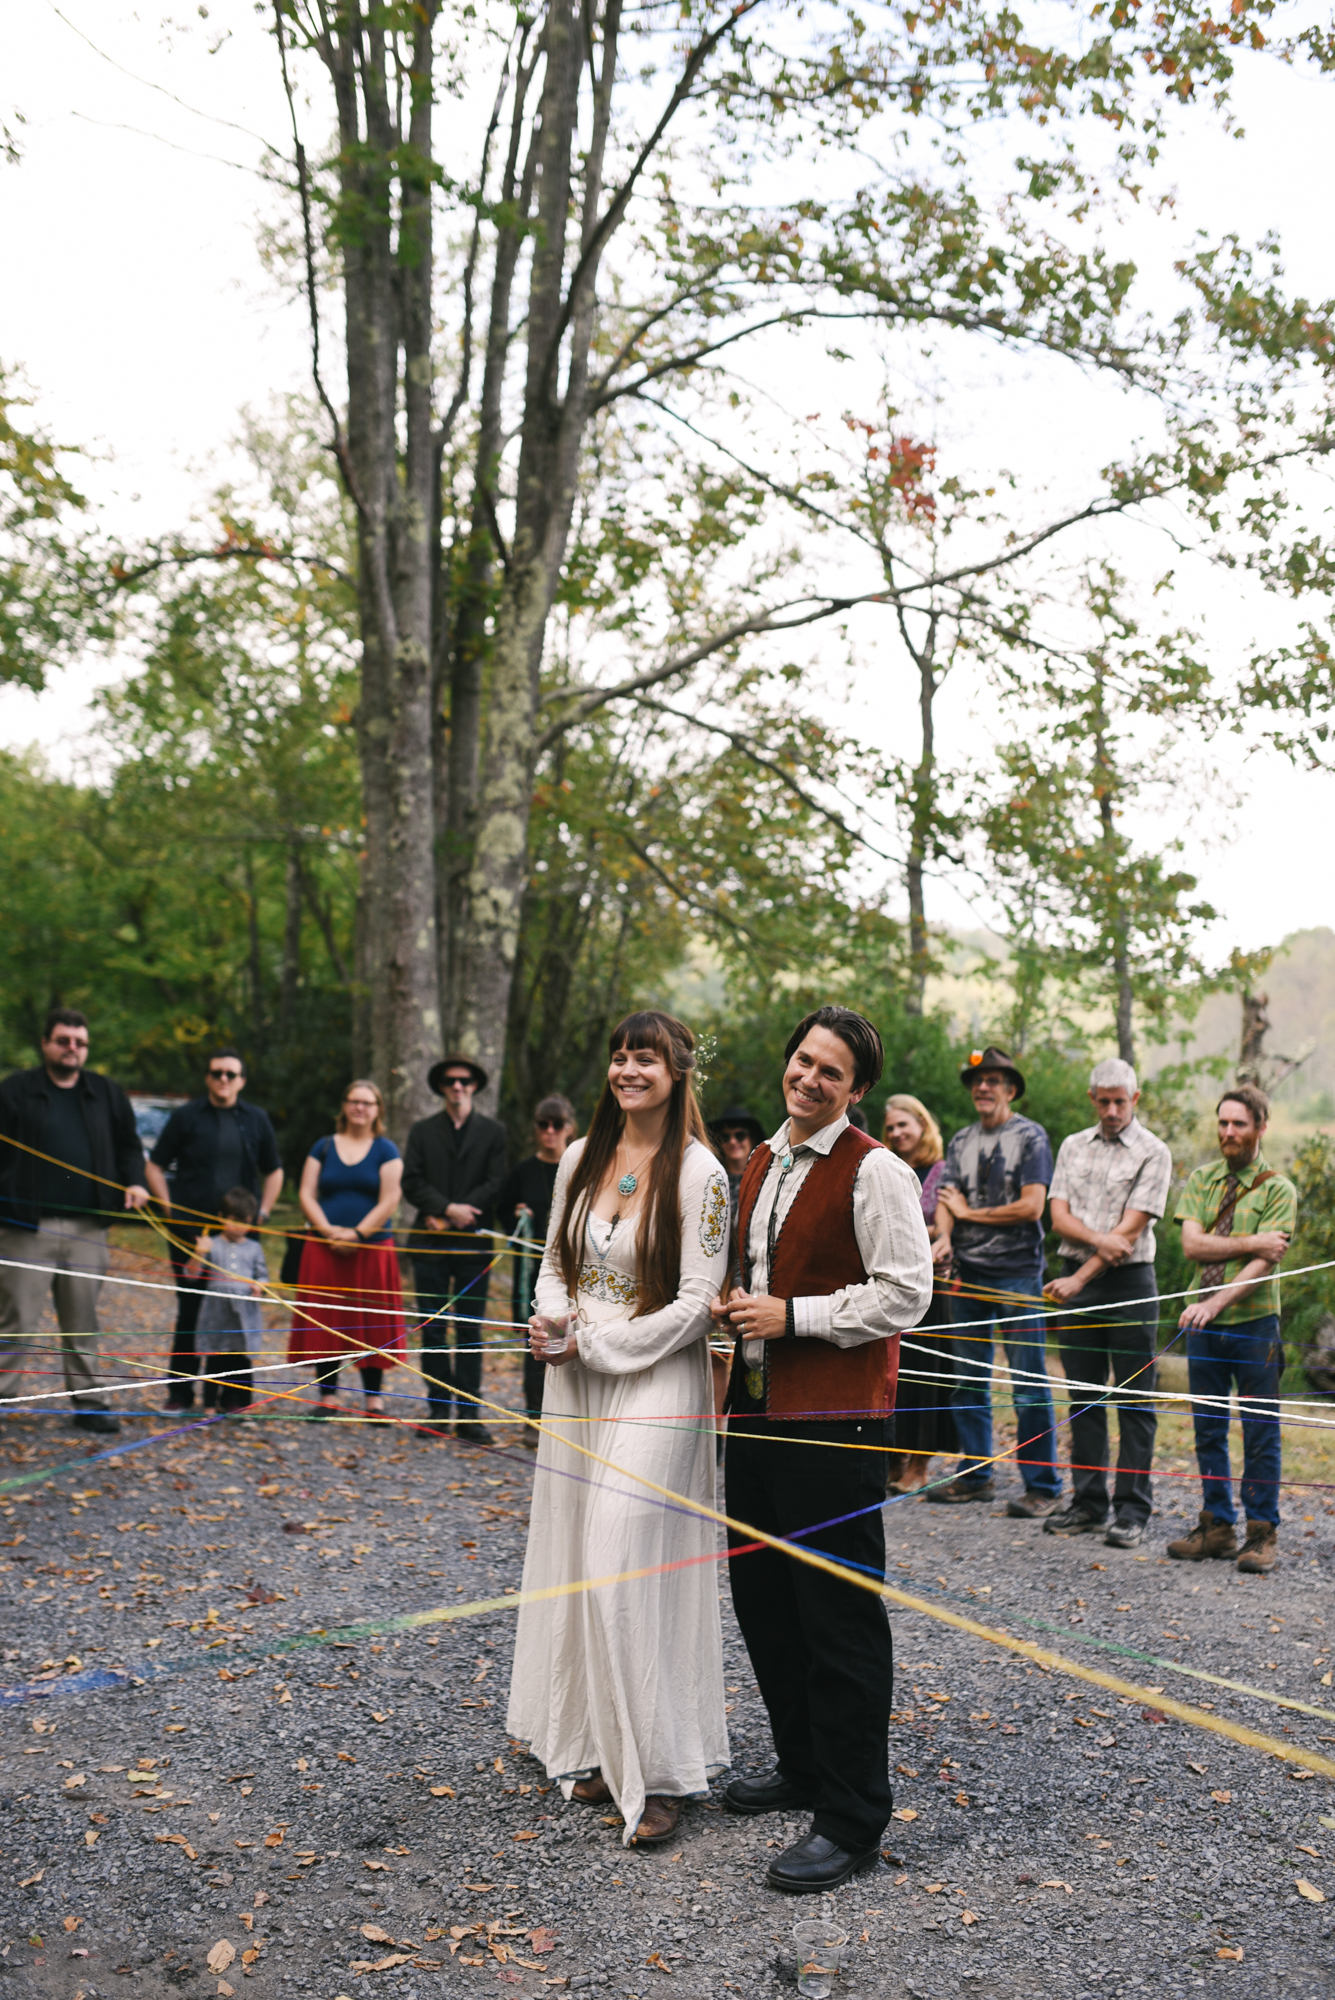  Mountain Wedding, Outdoors, Rustic, West Virginia, Maryland Wedding Photographer, DIY, Casual, bride and groom smiling together inside circle of friends, yarn ceremony 